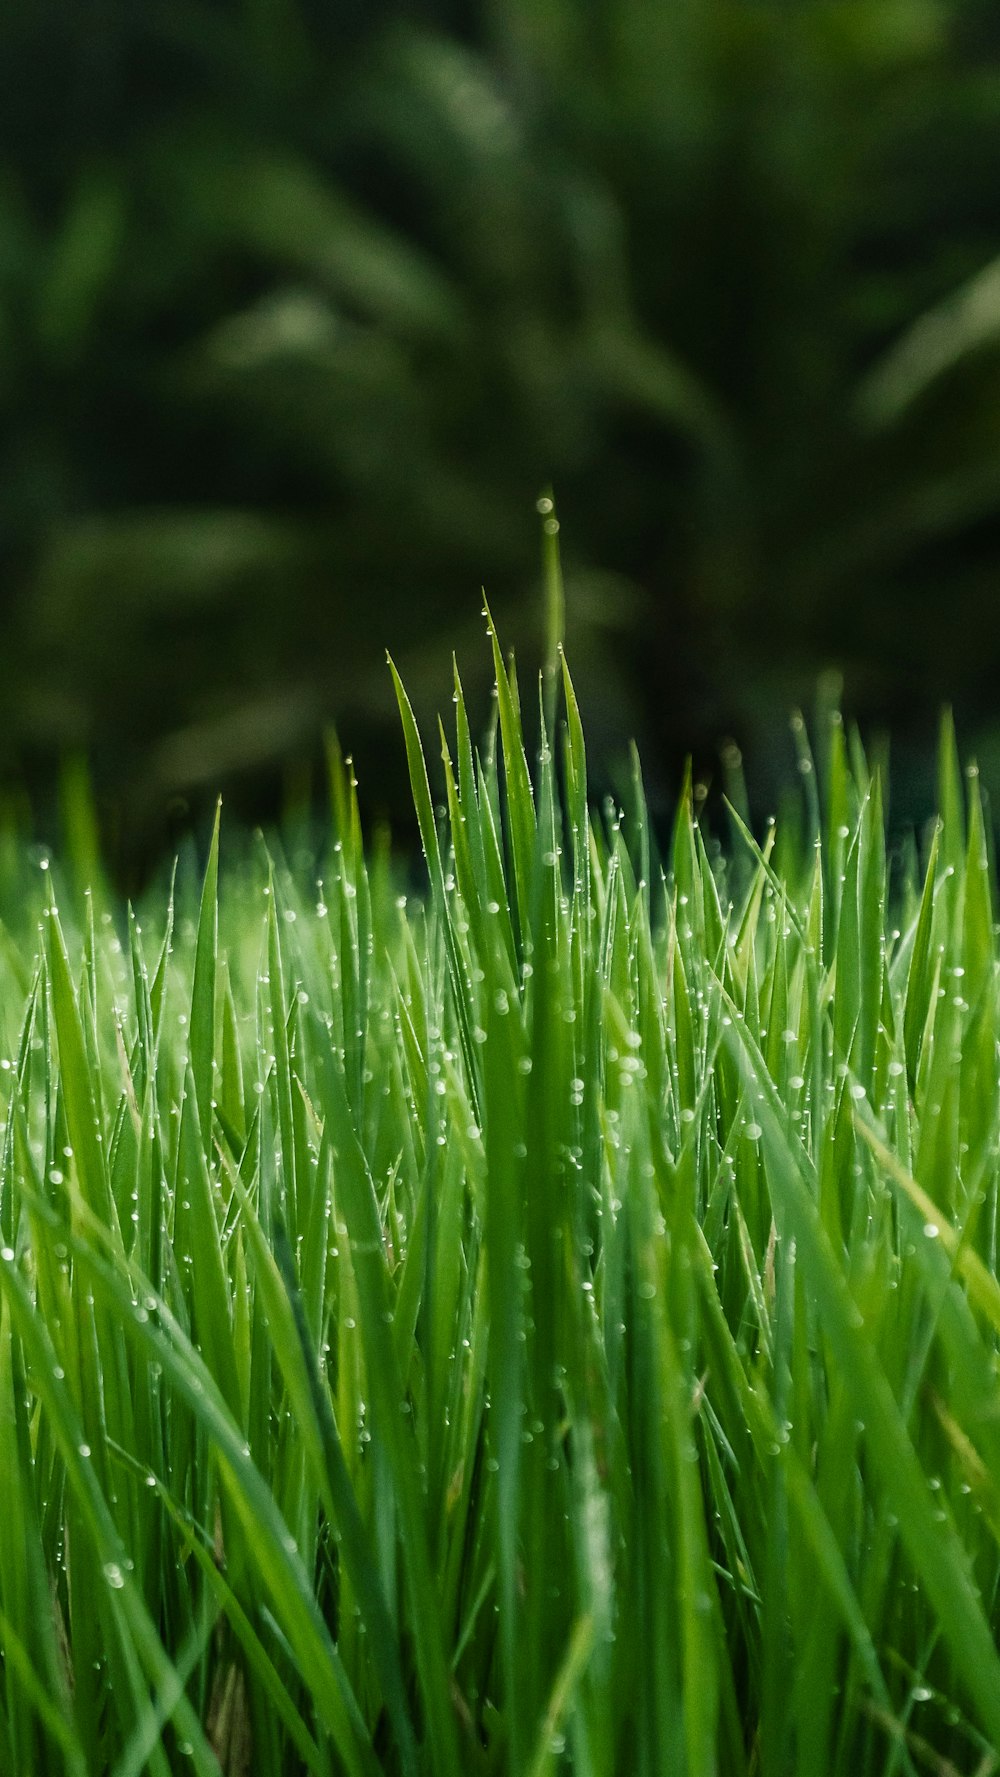 green grass field in close-up photo